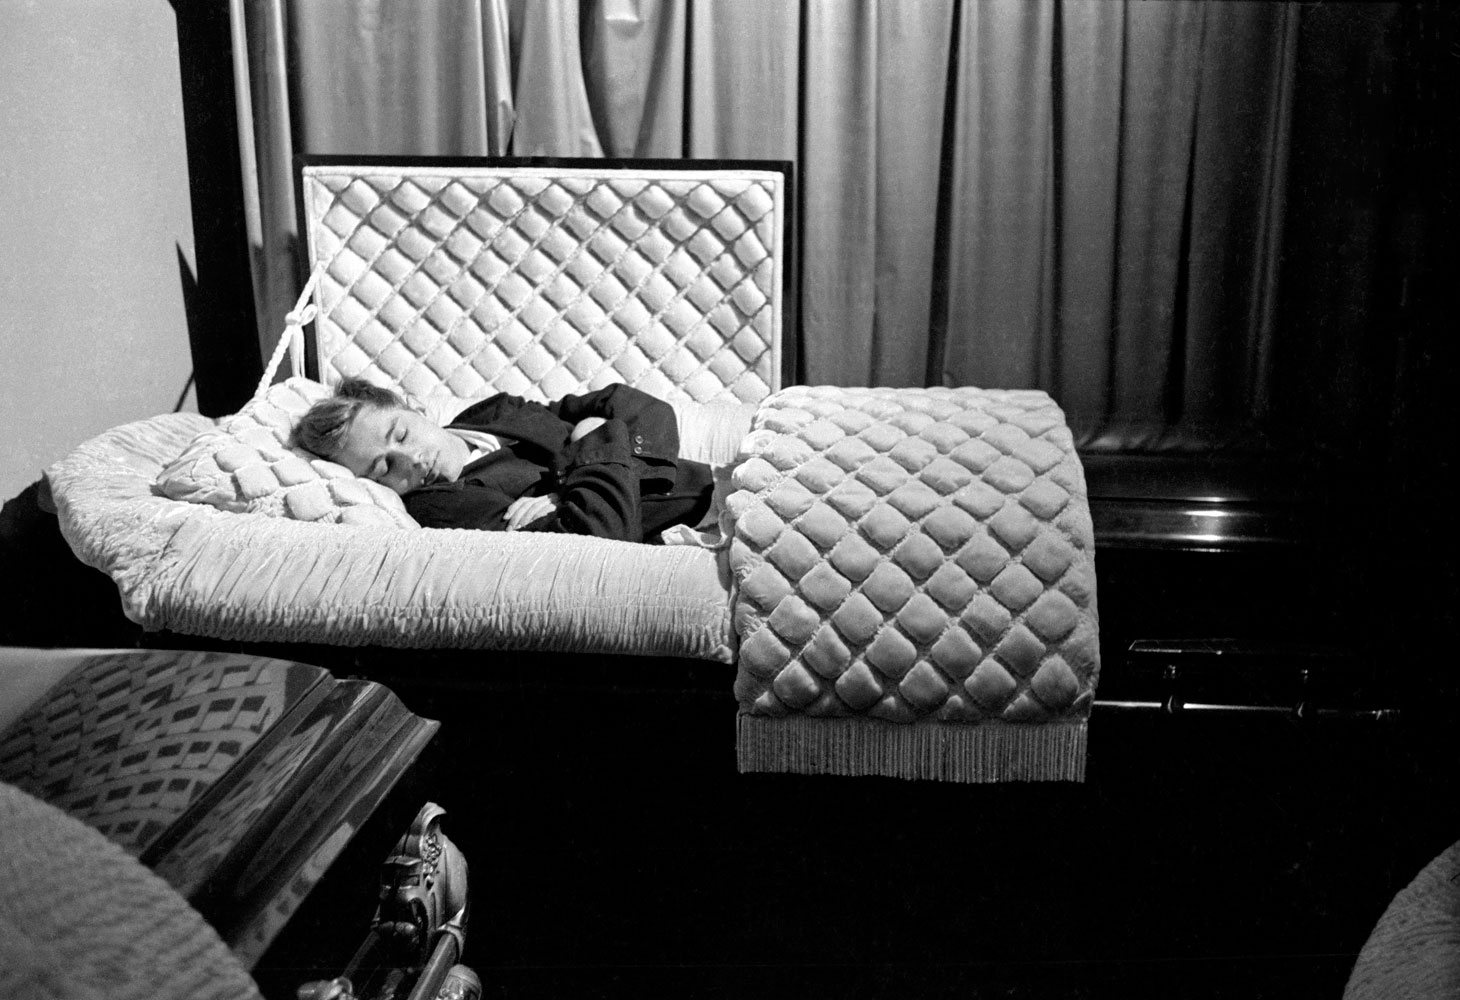 James Dean poses in a casket in a funeral parlor in Fairmount, Indiana, in 1955, seven months before he died.